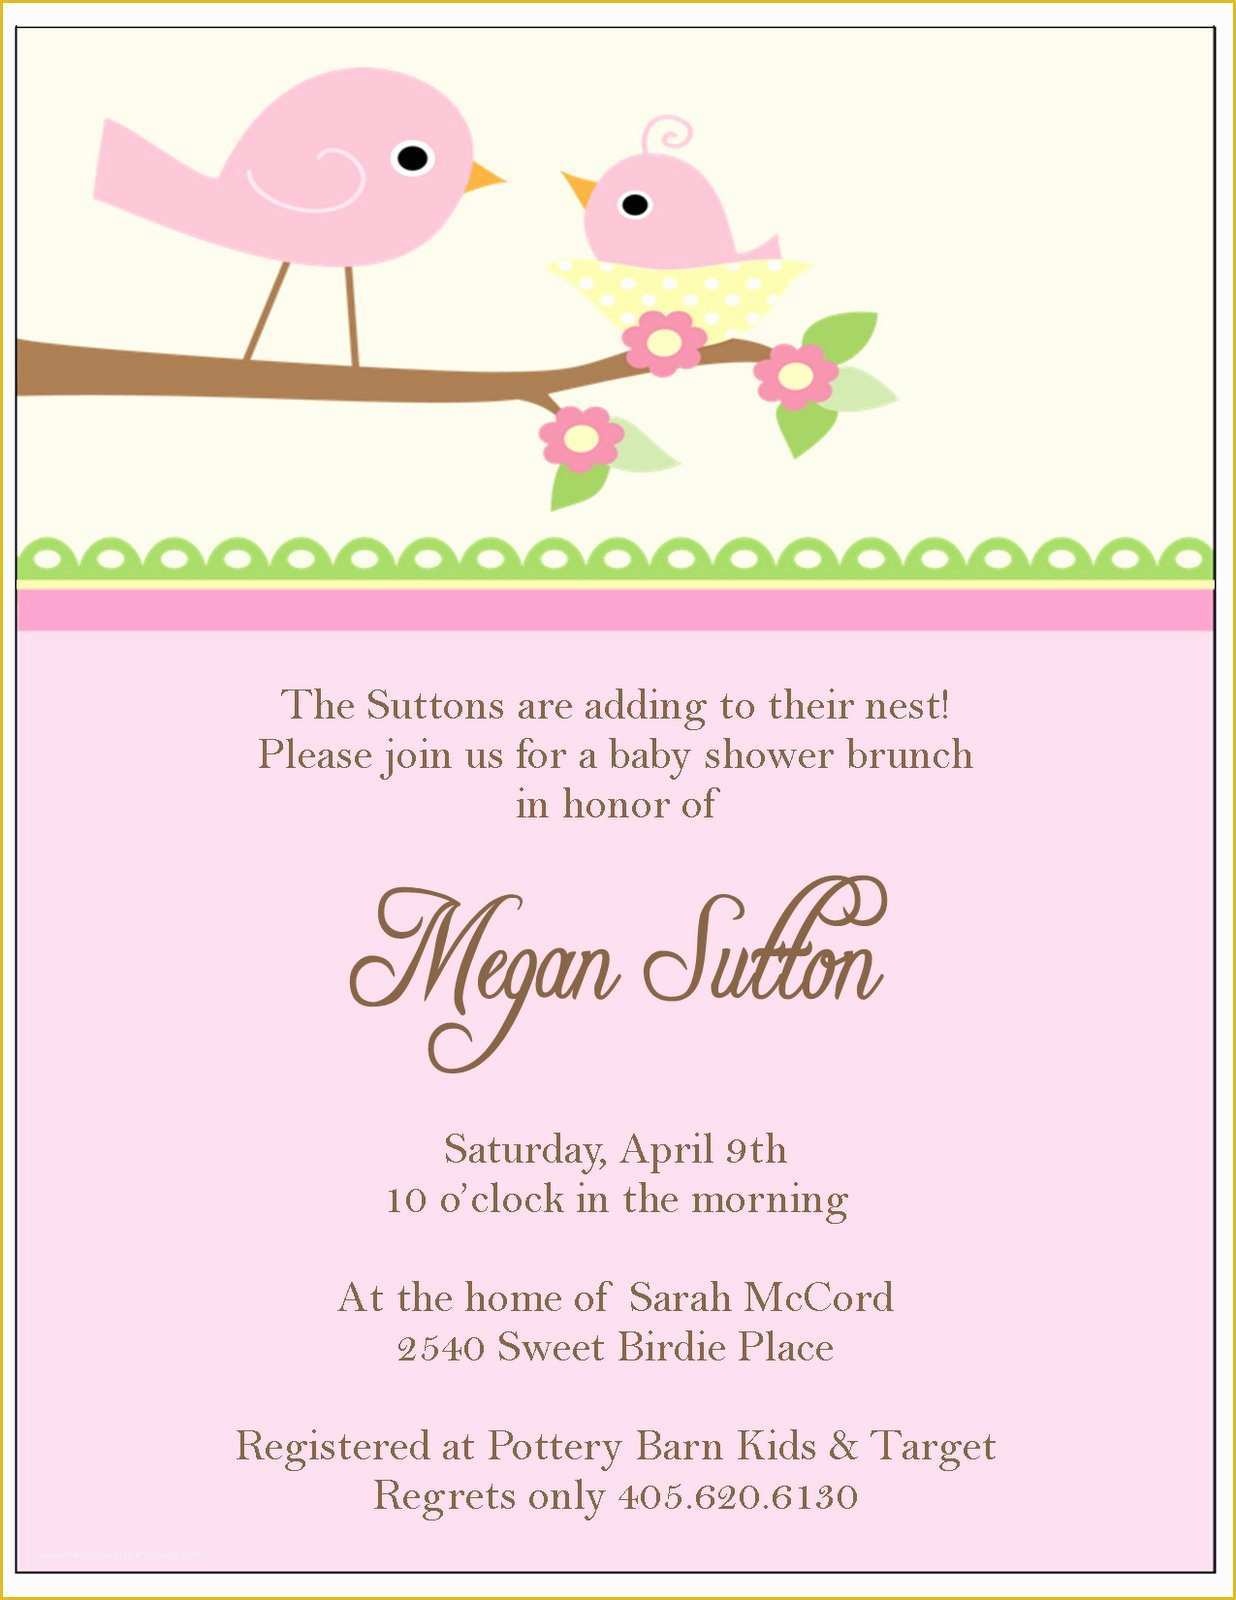 Free Baby Shower Invitation Templates Of Birthday Invitation Mickey Mouse Birthday Invitations